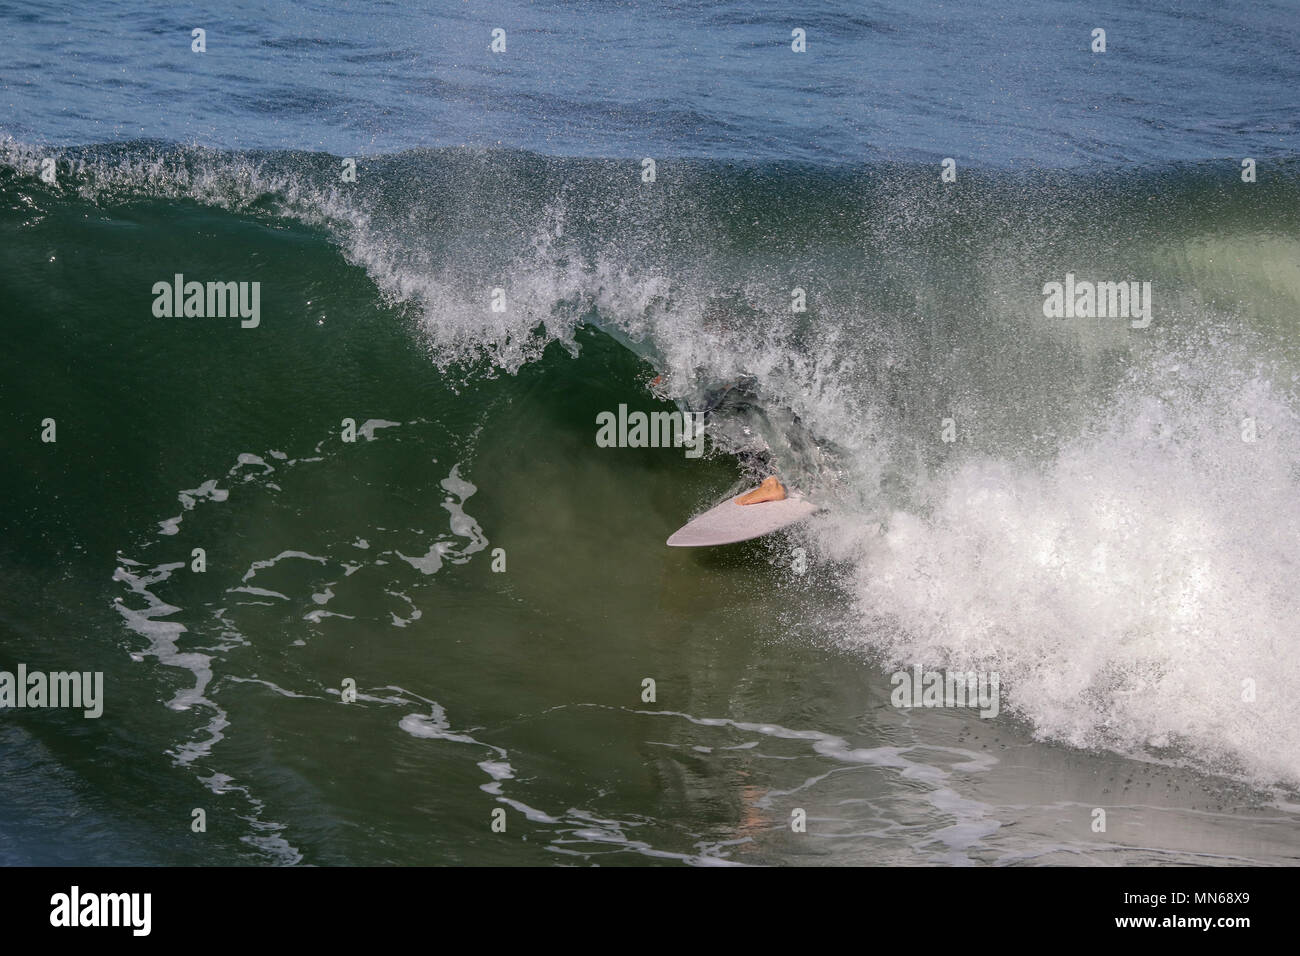 surfer coming out of the barrel of a wave Stock Photo